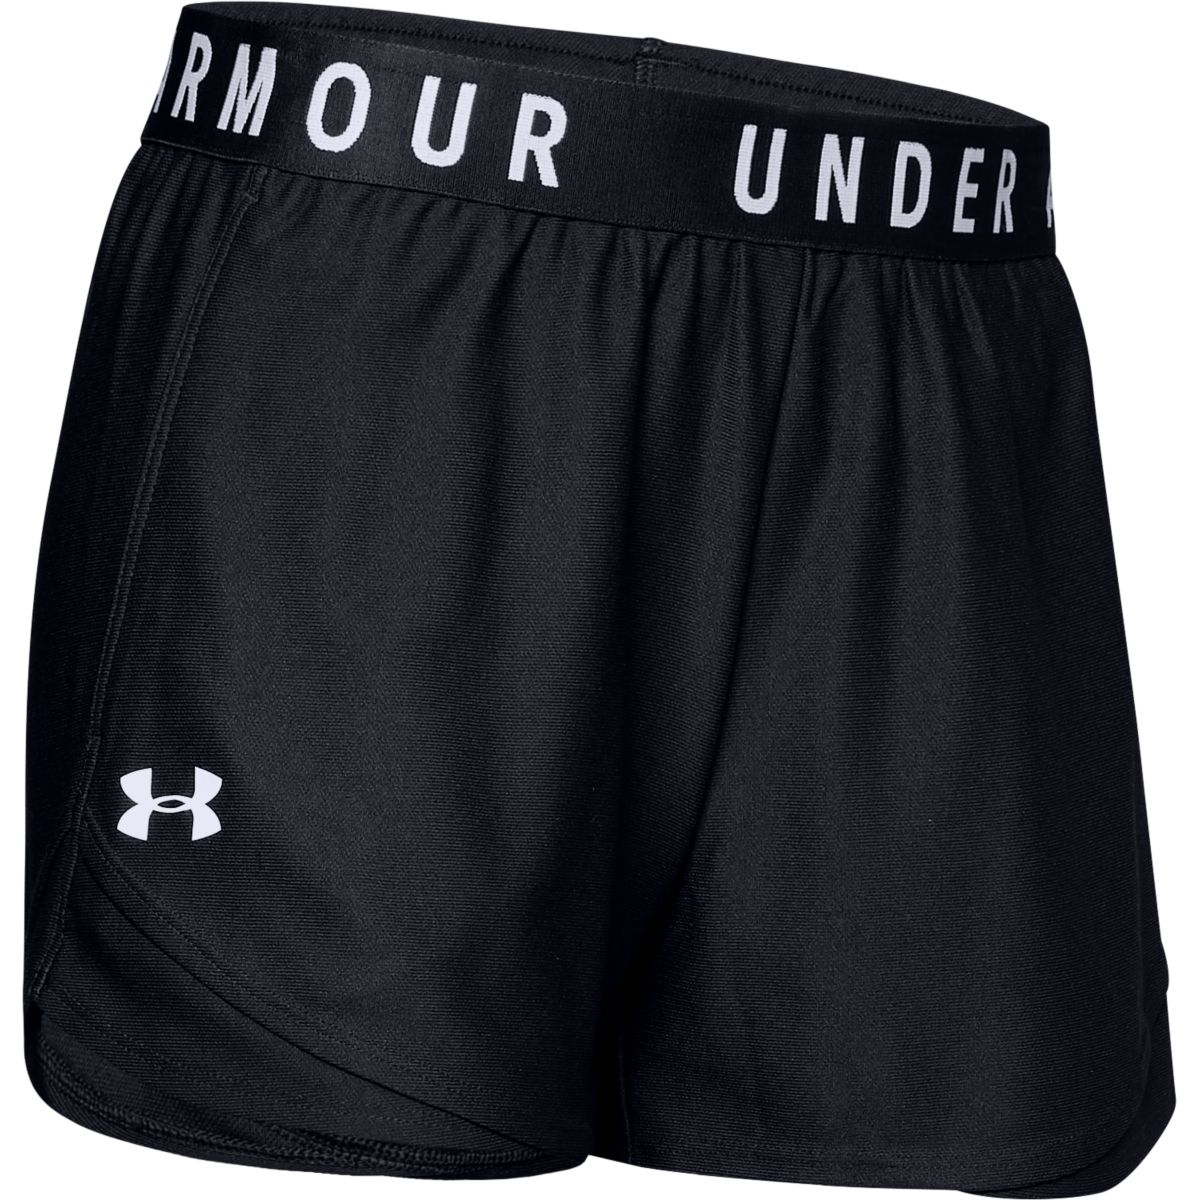 Under Armour Play Up 3.0 Women's Shorts 1344552-001